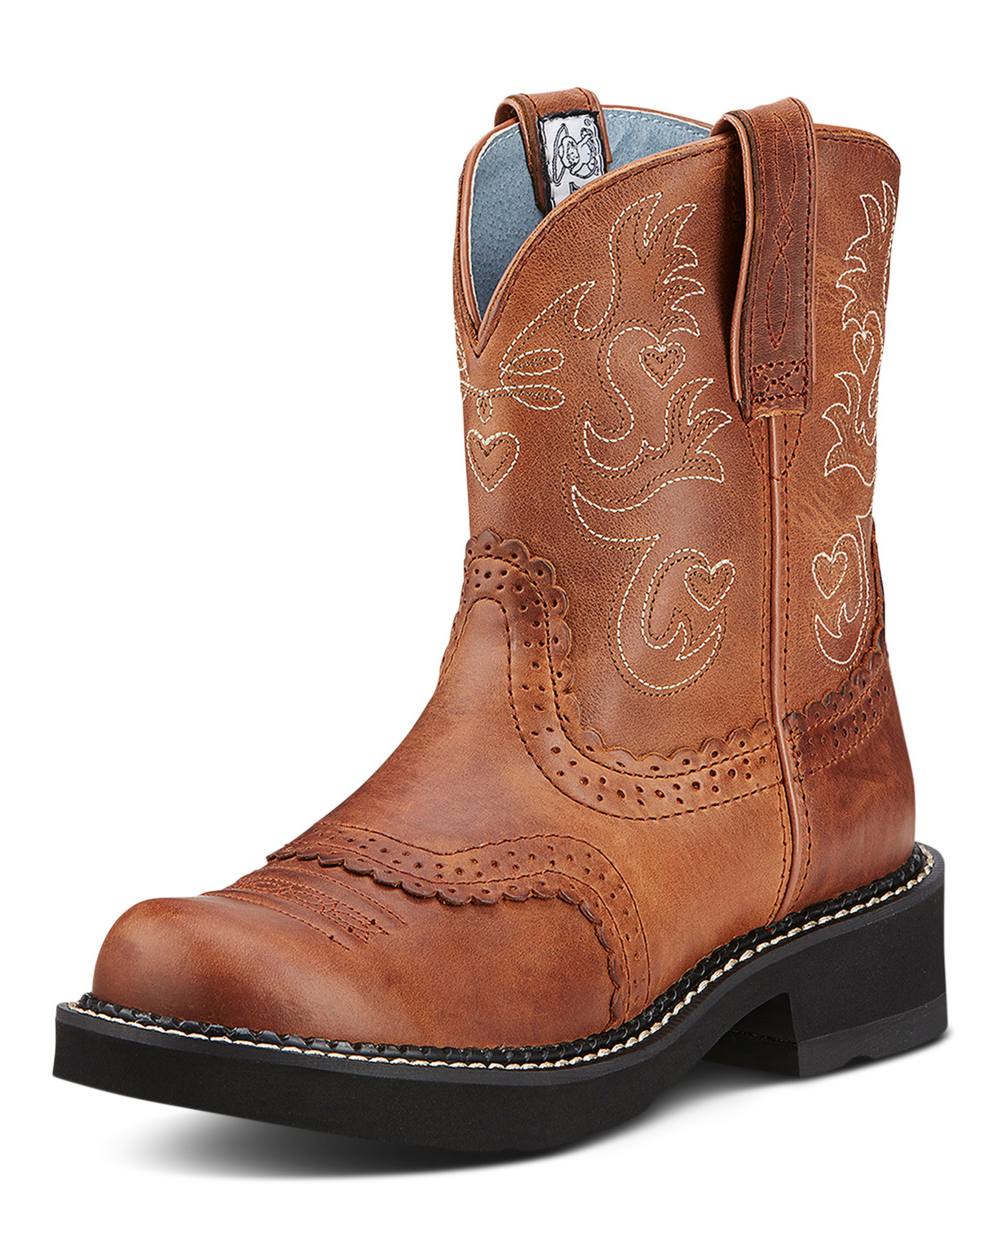 Ariat Womens Fatbaby Saddle Western Boot in Brown